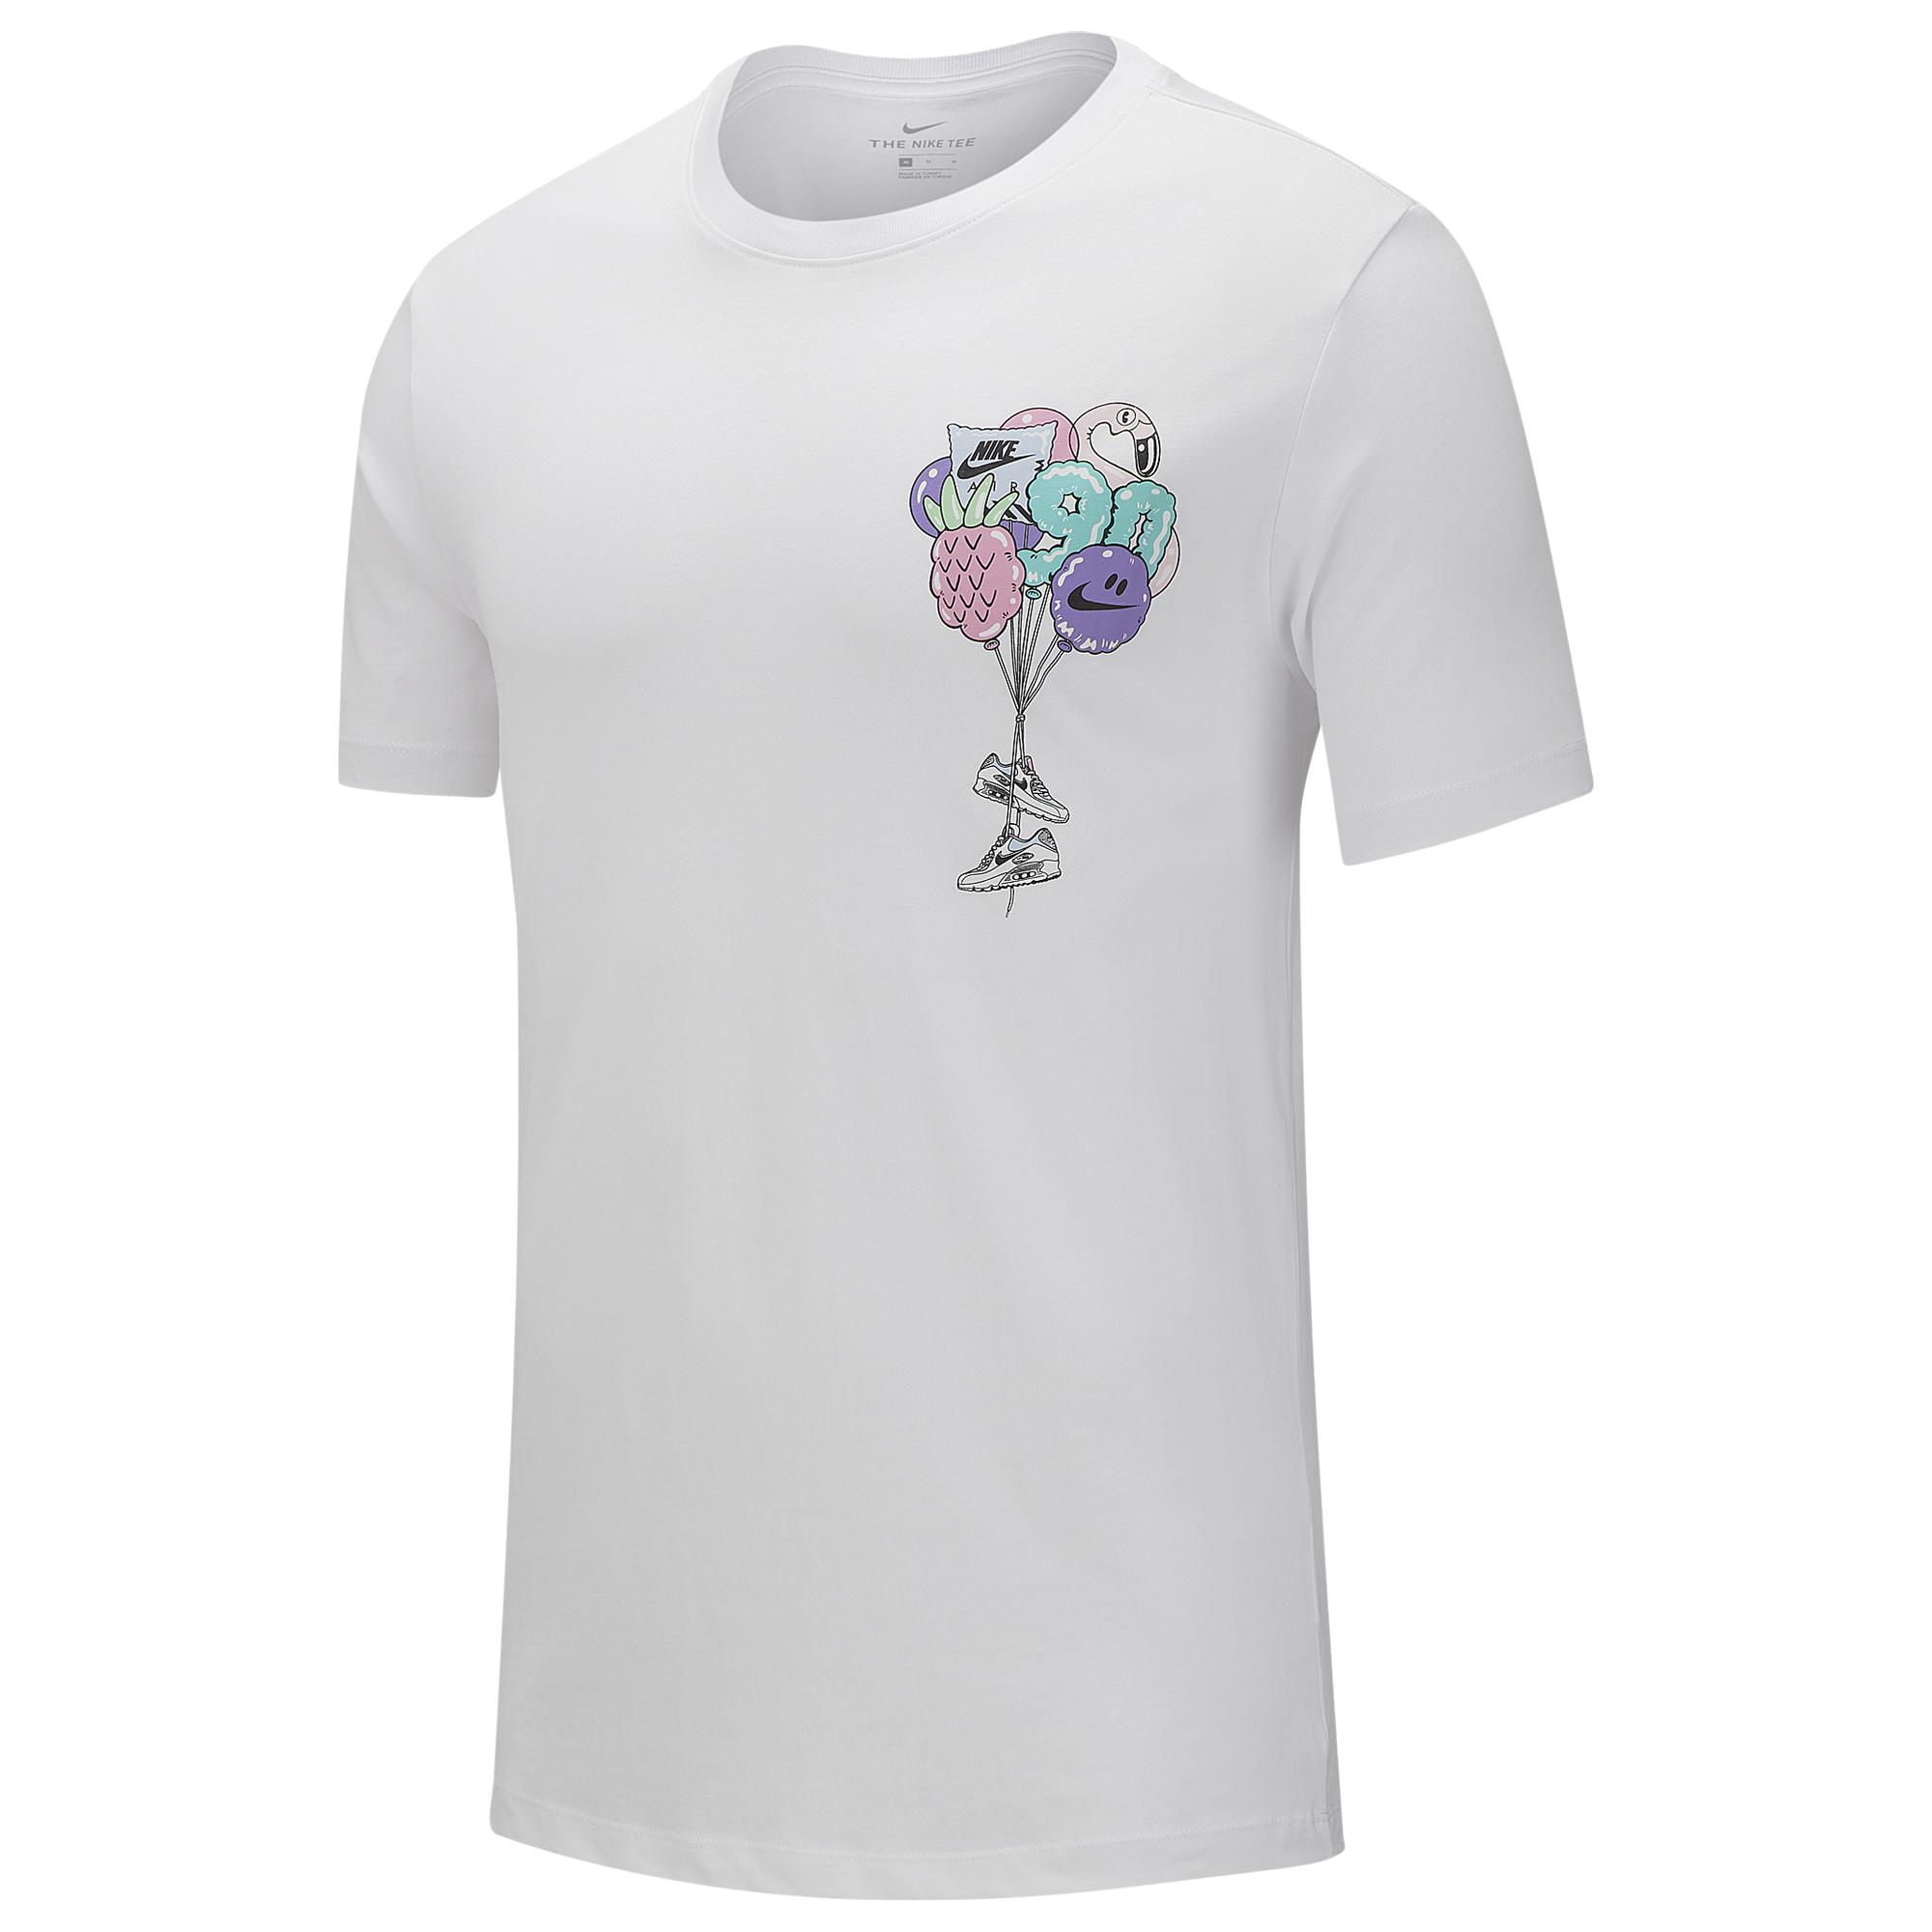 Nike Cotton Air Max Balloon T-shirt in White for Men - Lyst